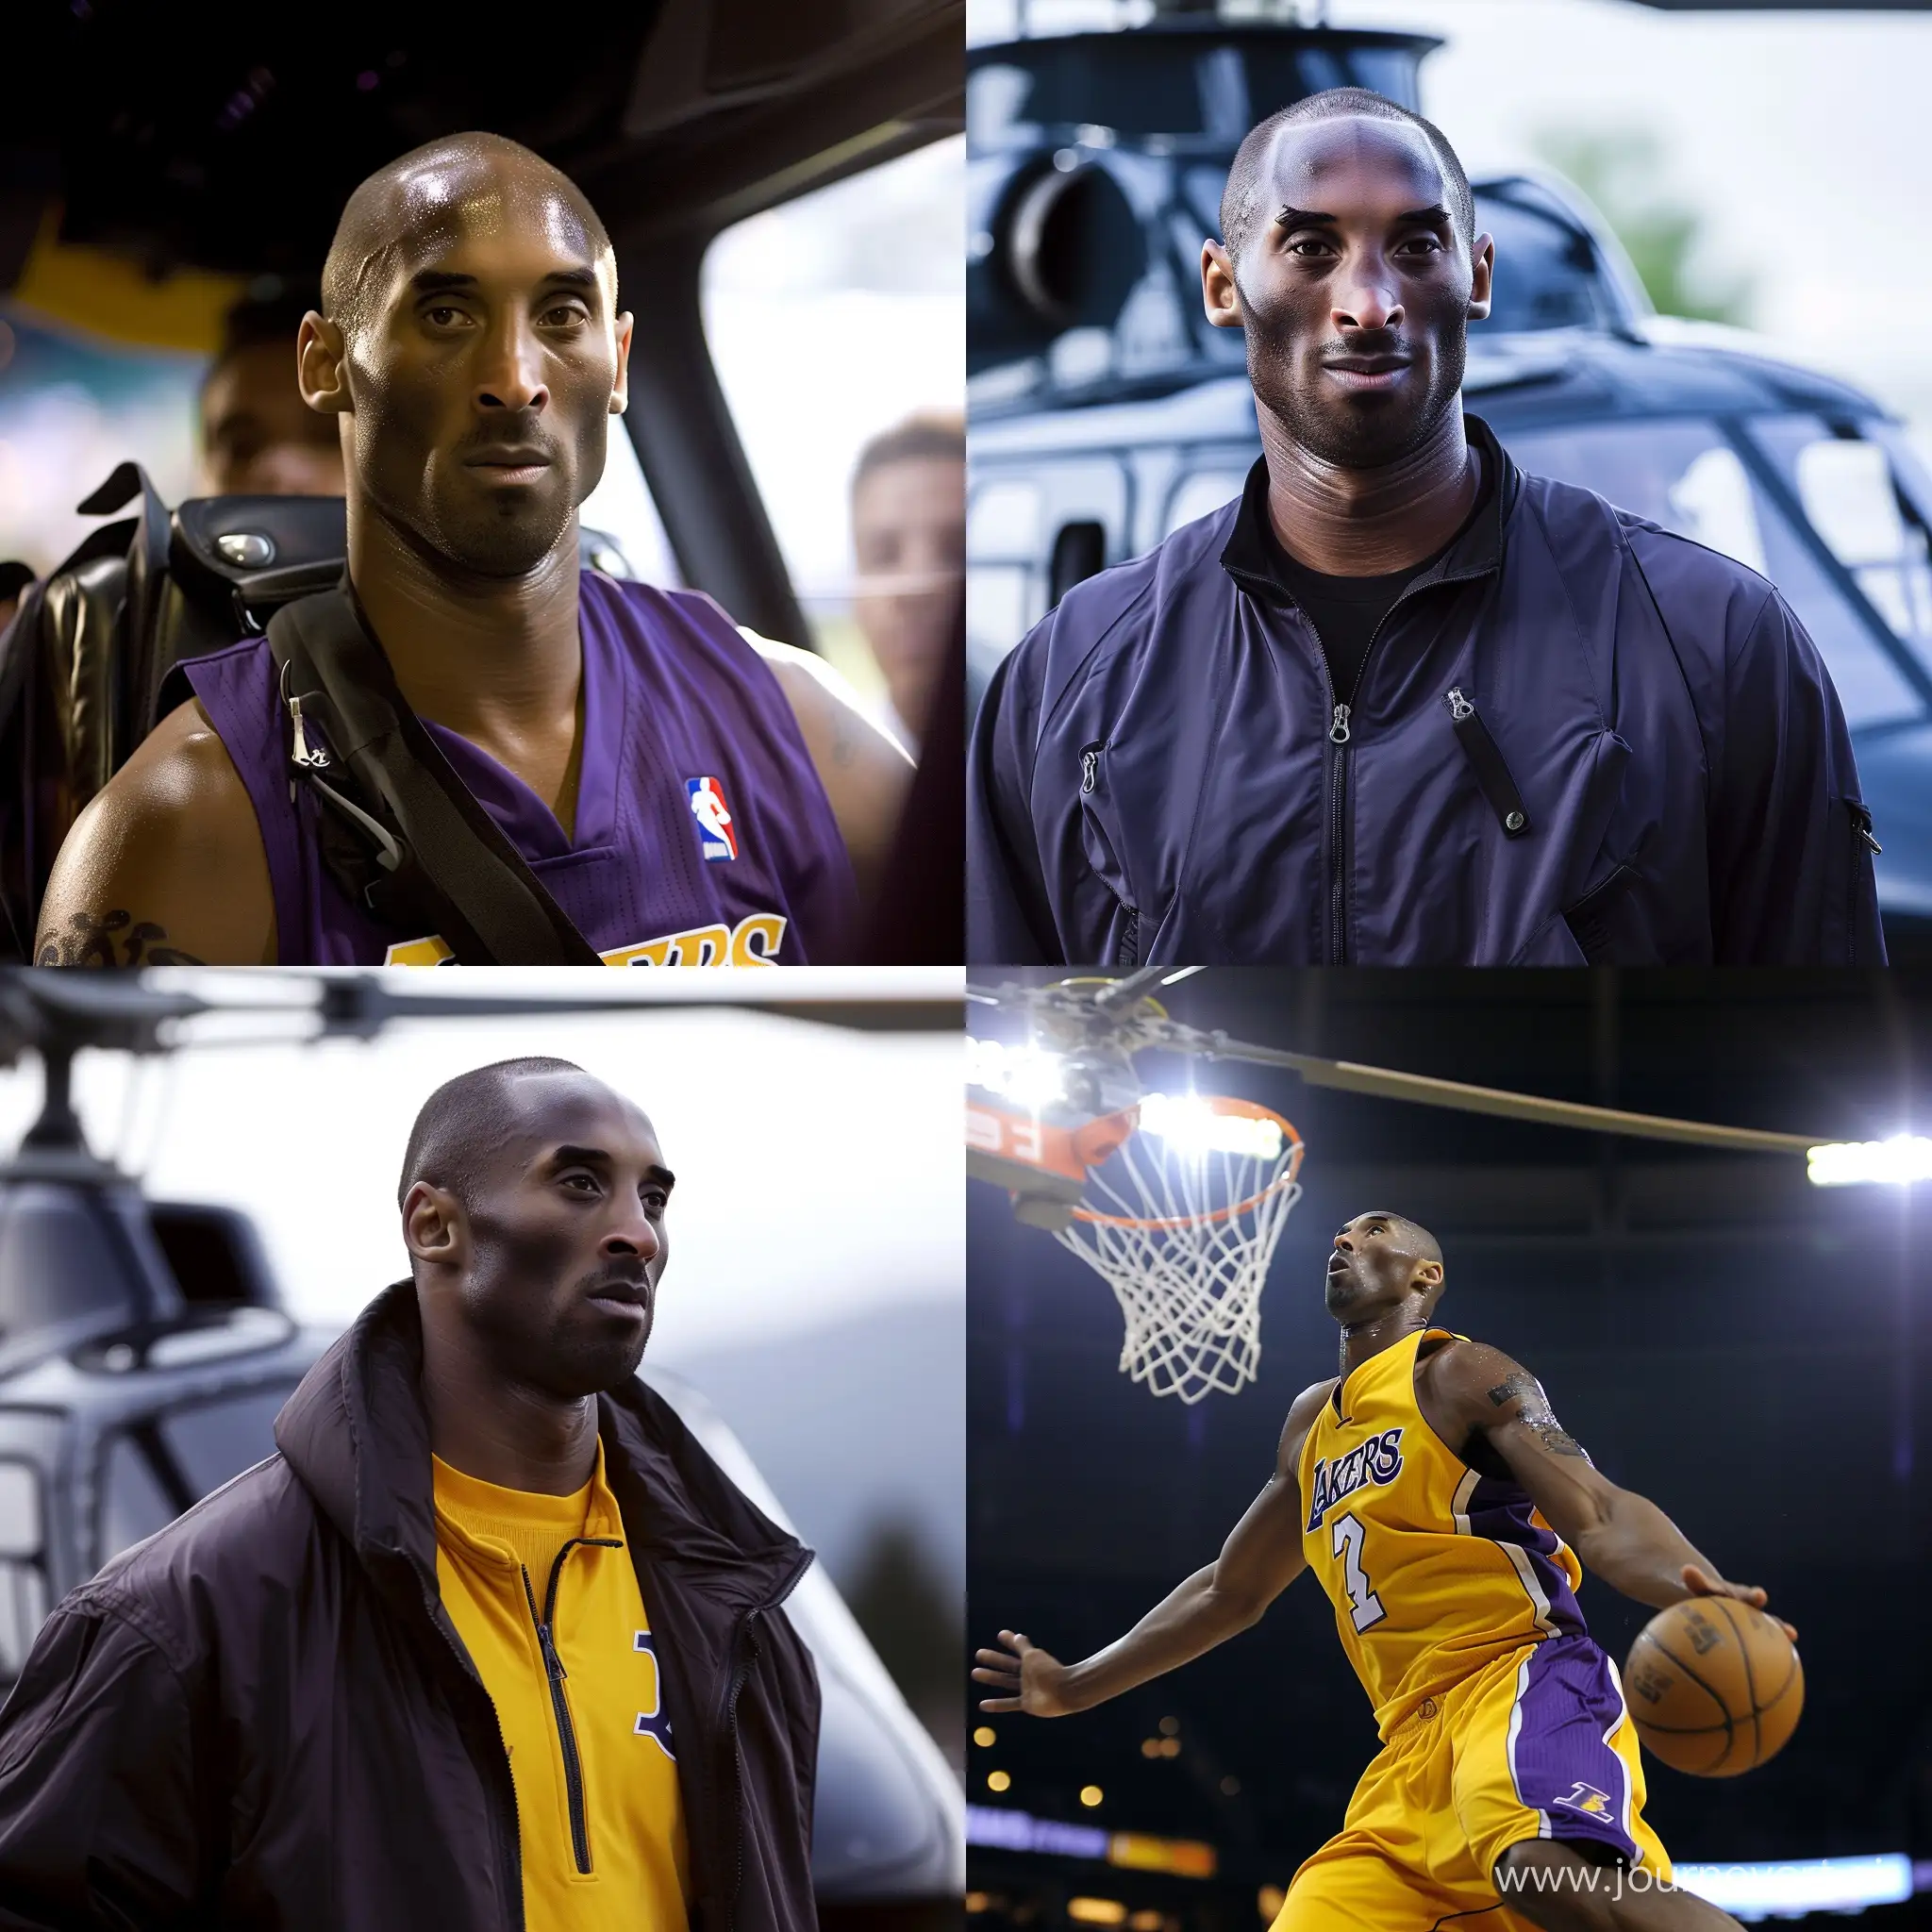 Kobe Bryant takes a helicopter